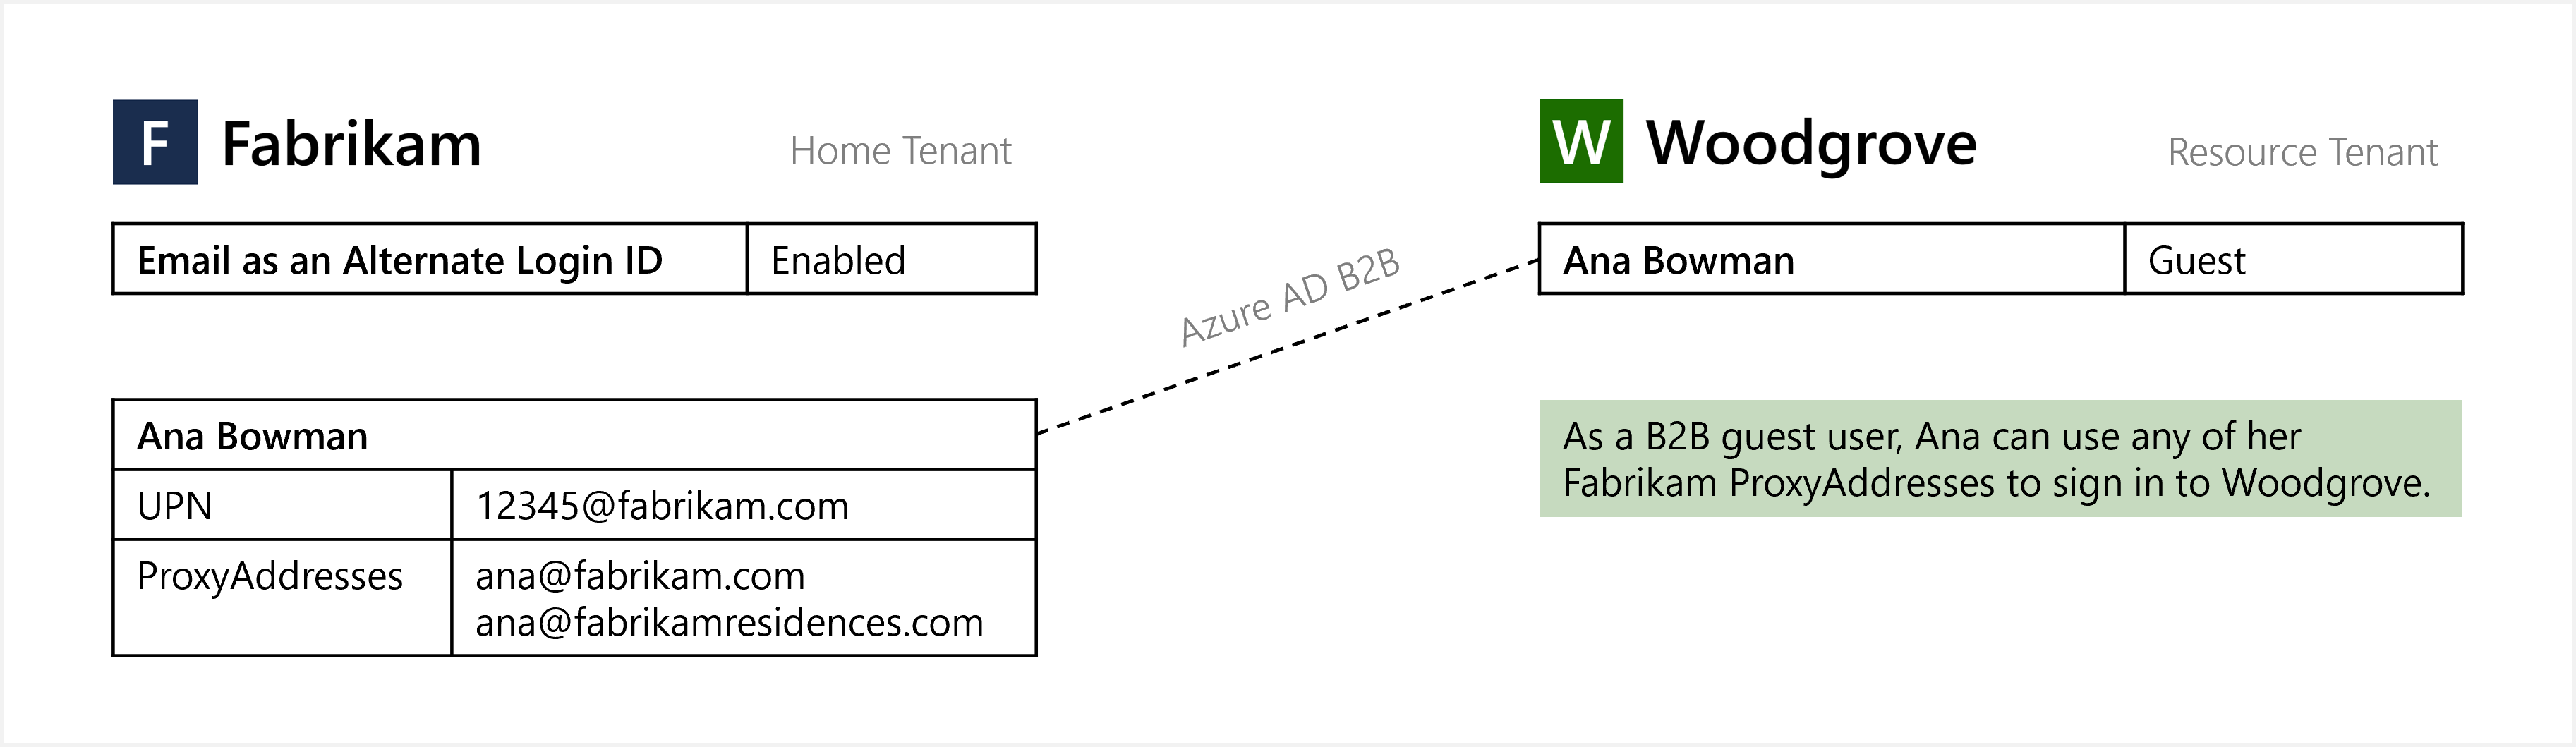 Diagram of email as an alternate login ID for B 2 B guest user sign-in.